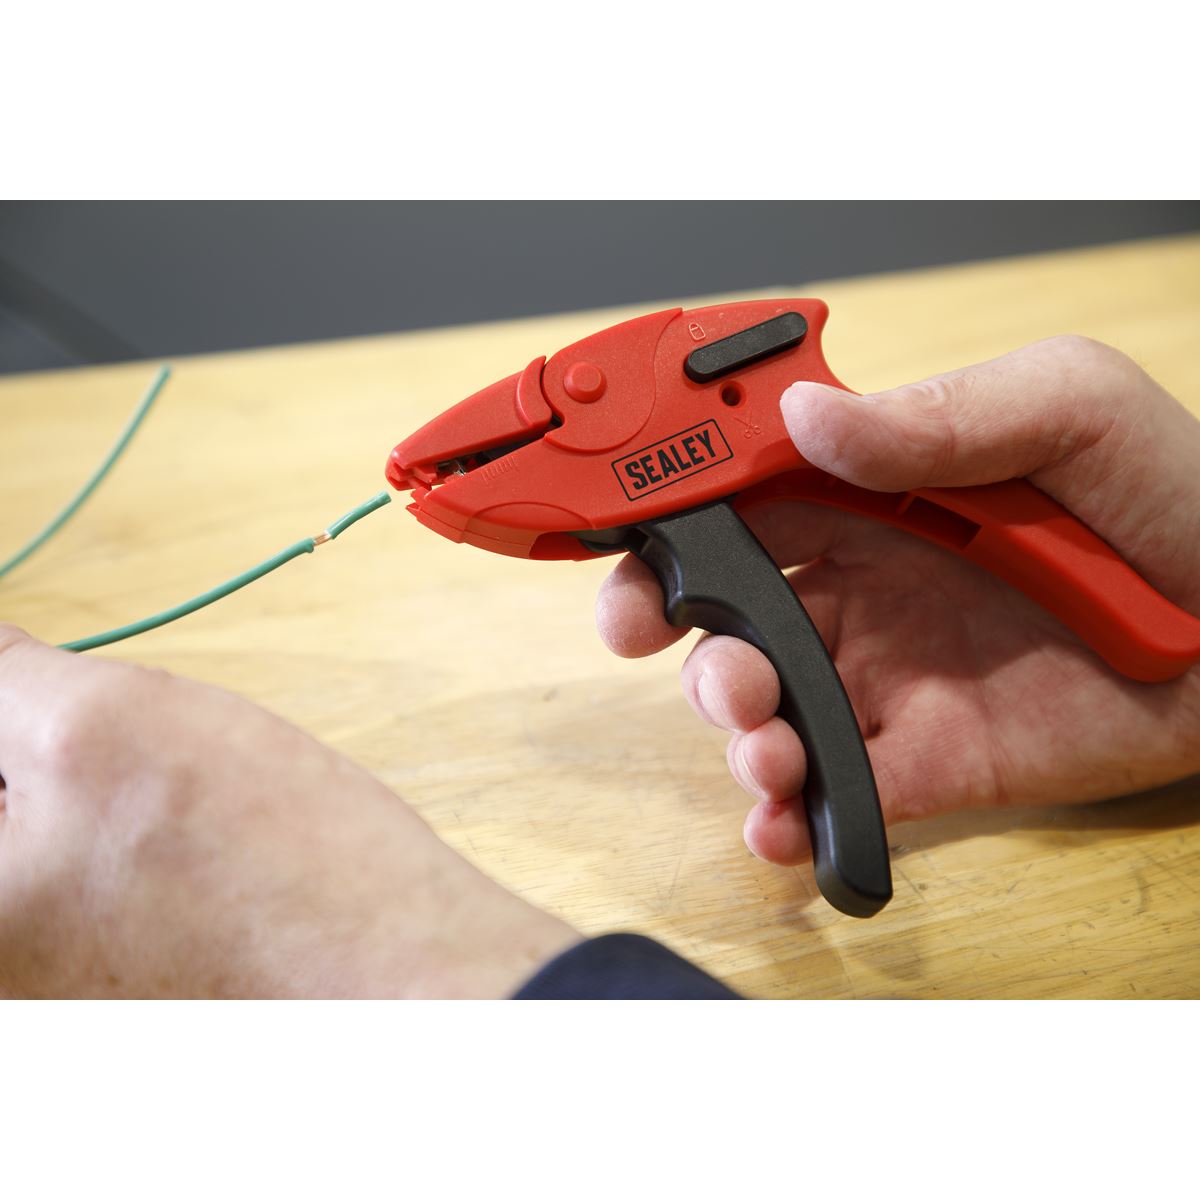 Sealey Pistol Grip - Automatic Wire Stripping Tool